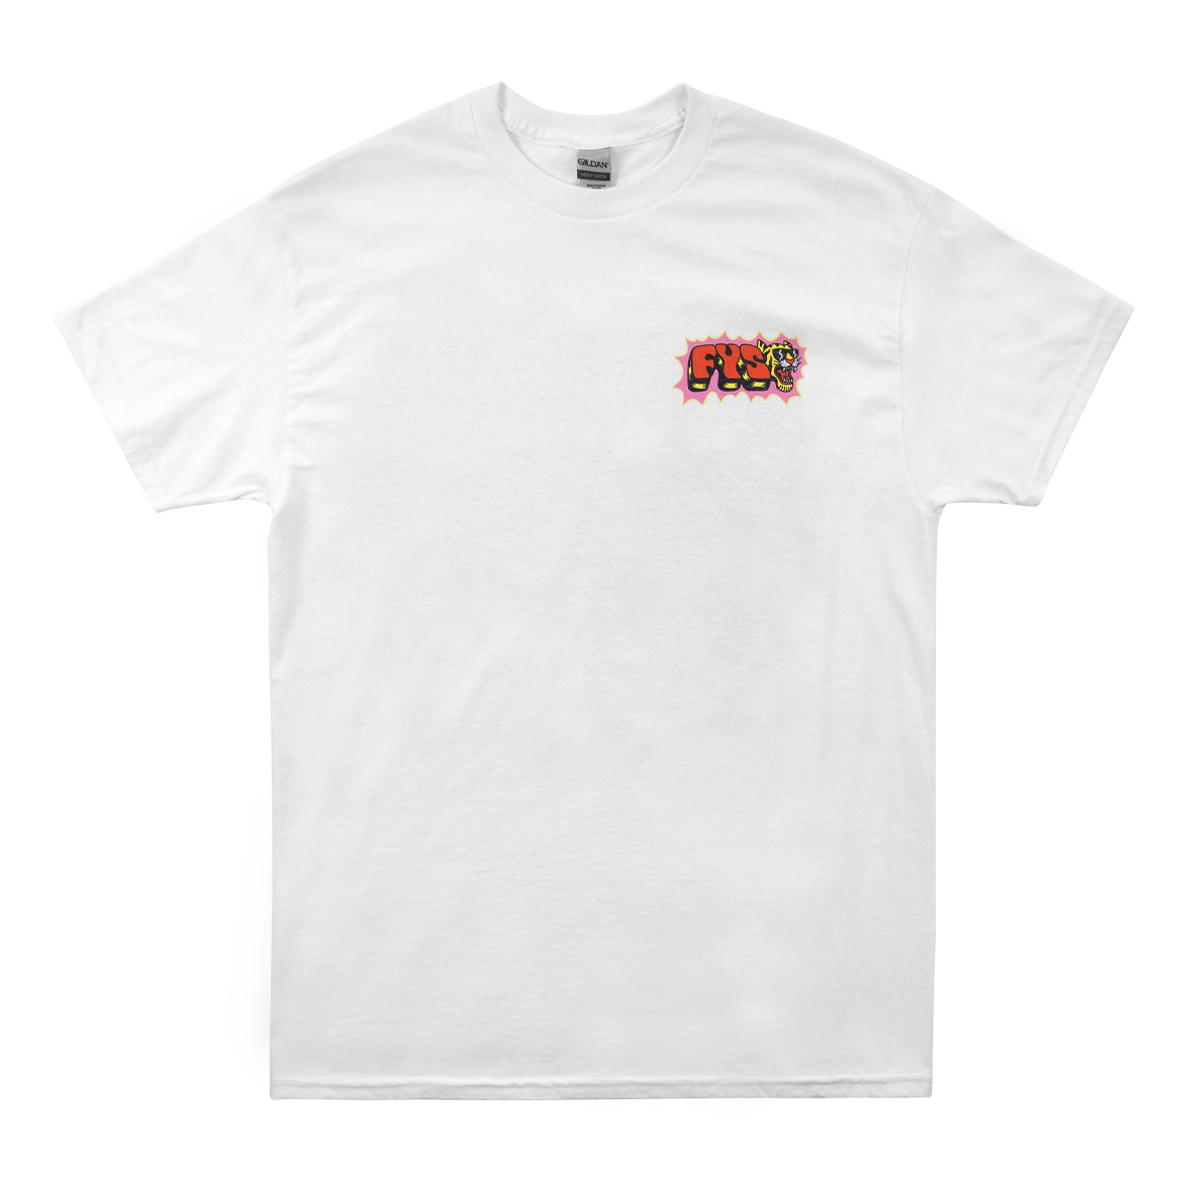 It´s Cool White Tee